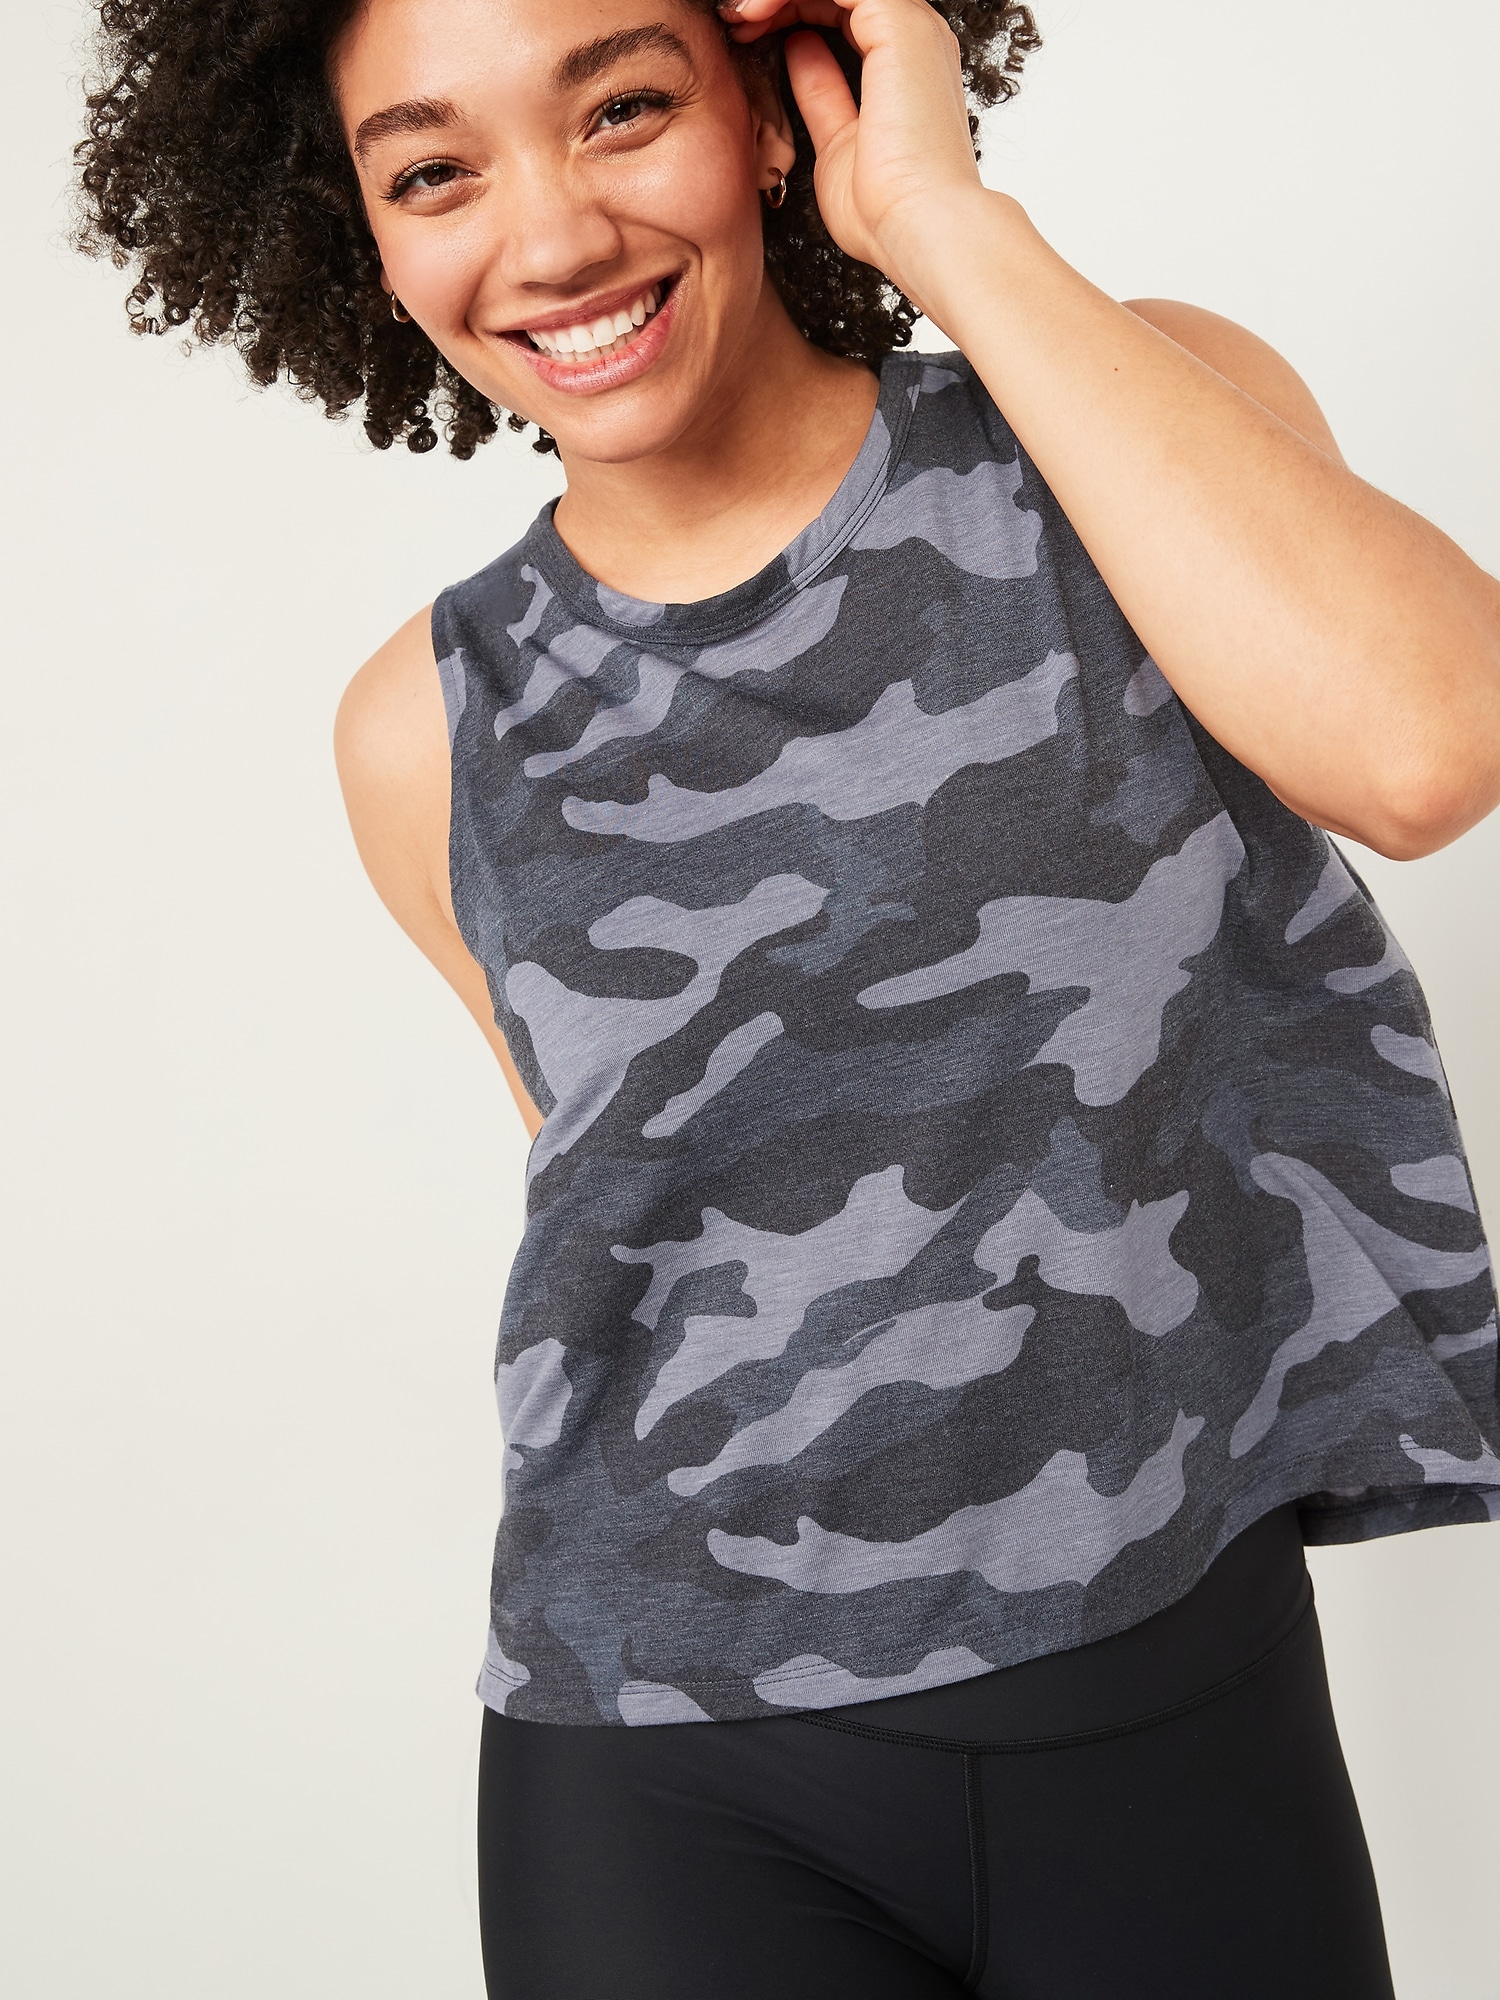 UltraLite All-Day Performance Crop Tank Top for Women